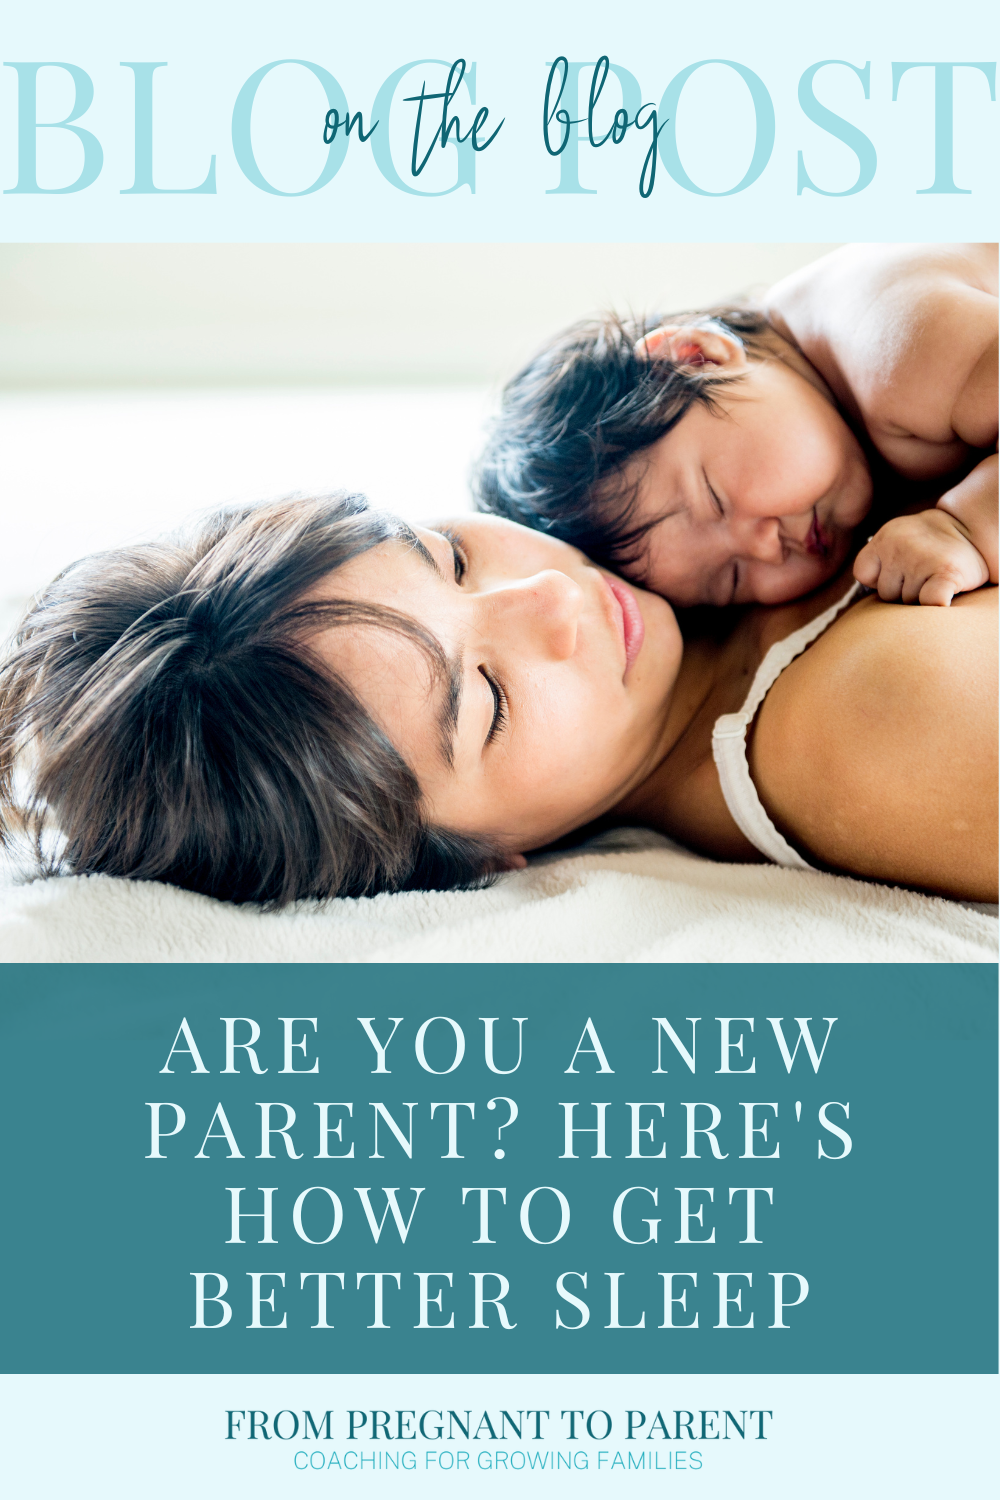 How to get more sleep as a new parent. Pin it to save this article for later!